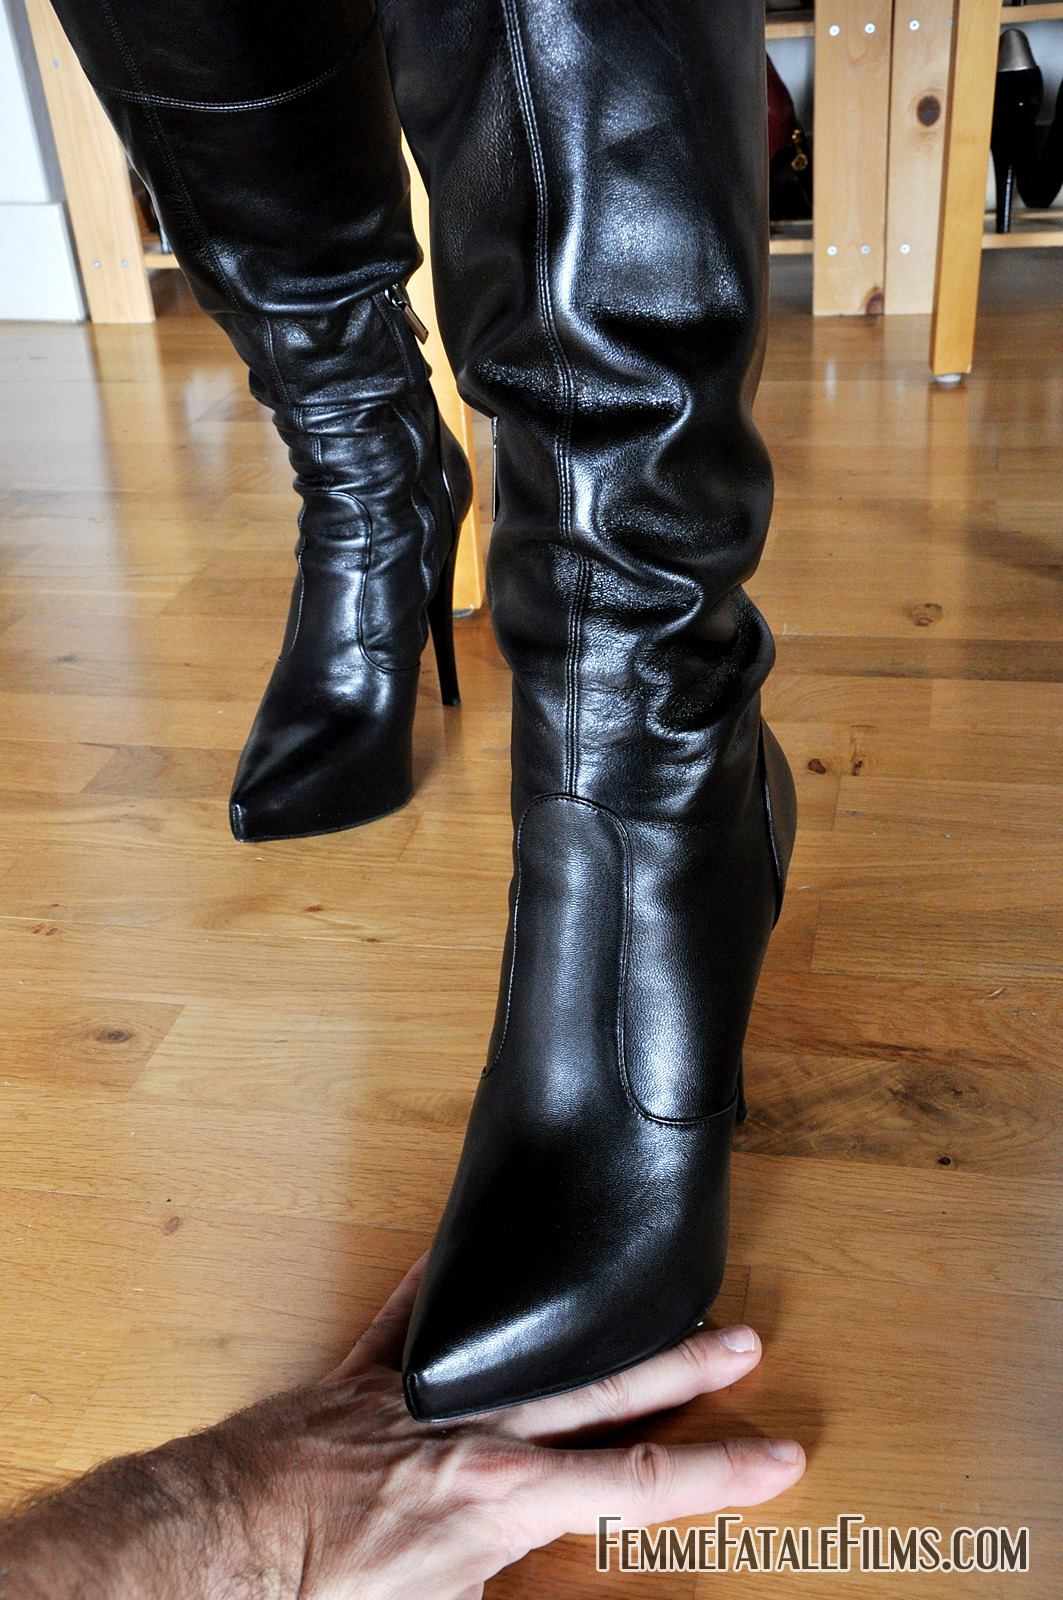 Leather mistress boot worship